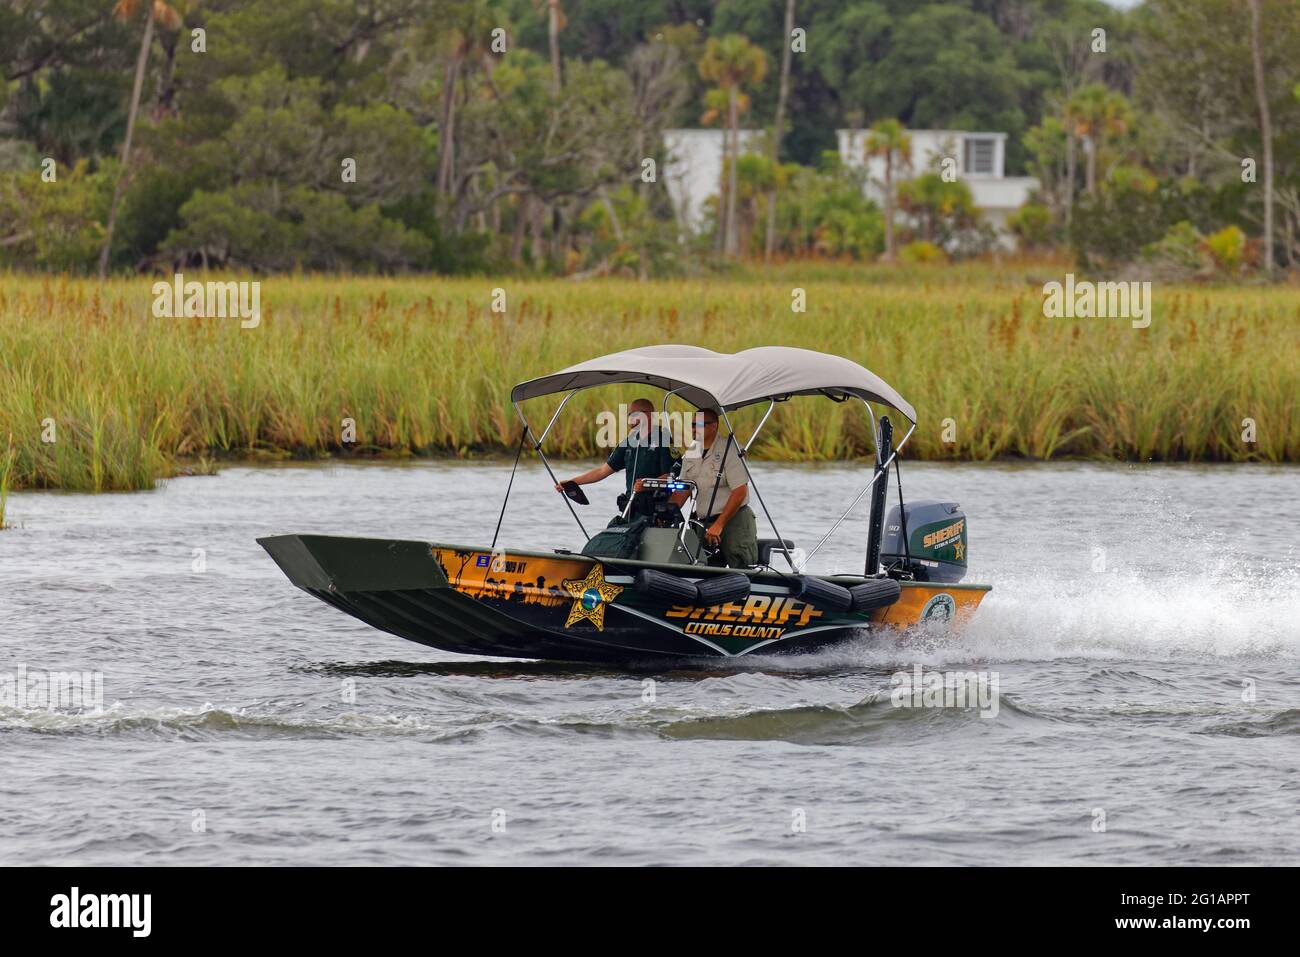 JUNE 5, 2021, CRYSTAL RIVER, FL: Deputies from the Citrus County Sheriff’s Office Marine Division respond to 911 call on the water. Stock Photo